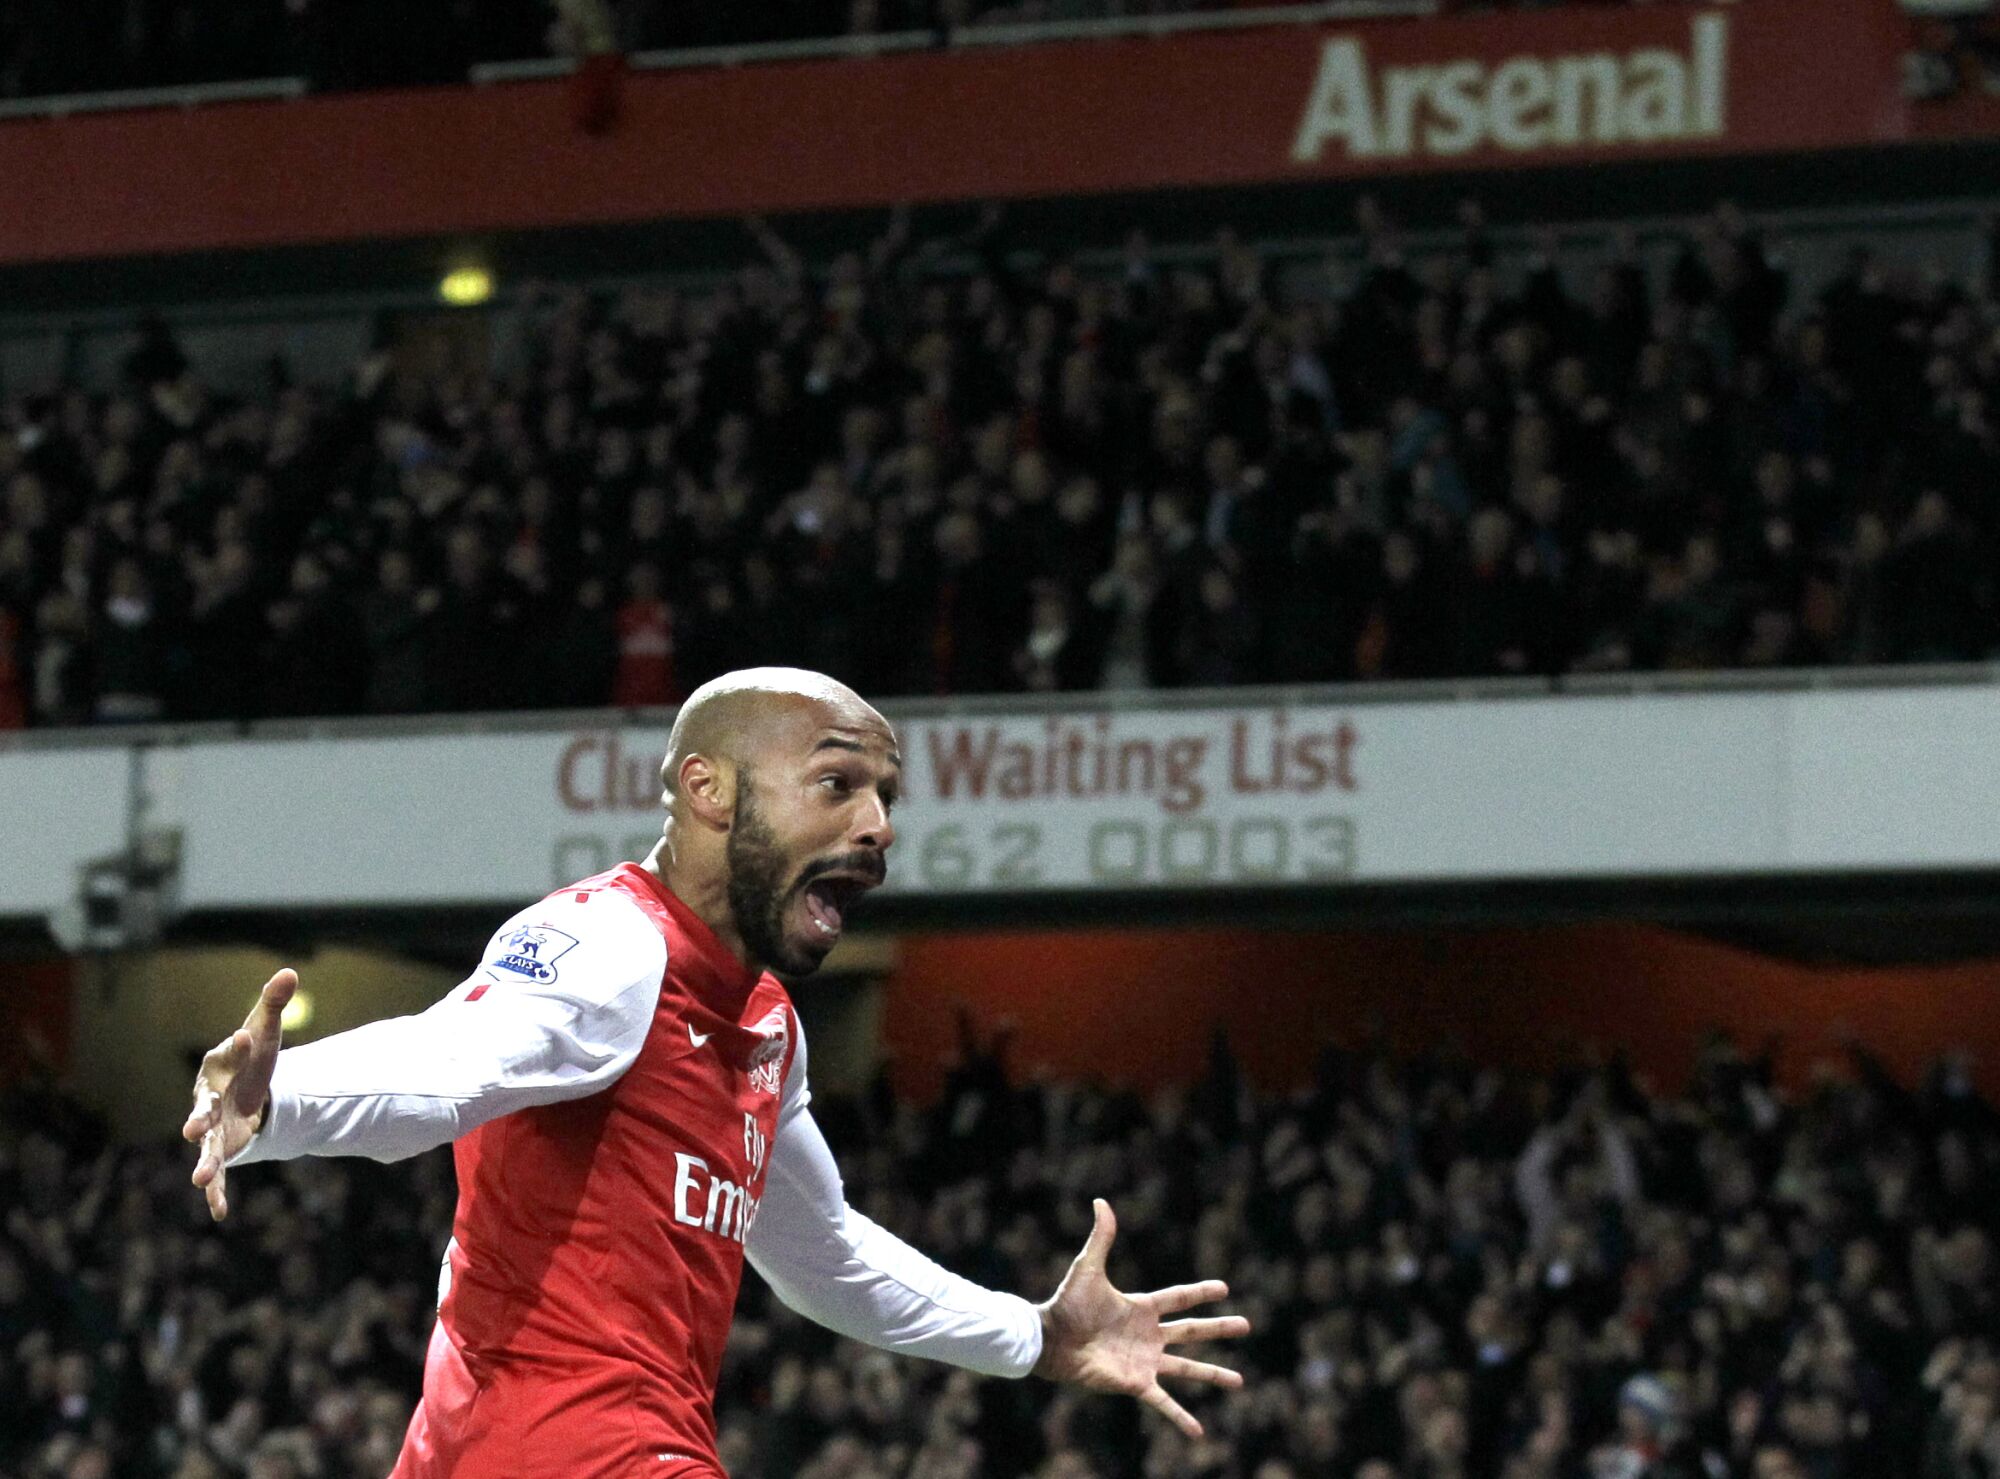 Thierry Henry extends his arms and shouts, celebrating scoring for Arsenal in 2012